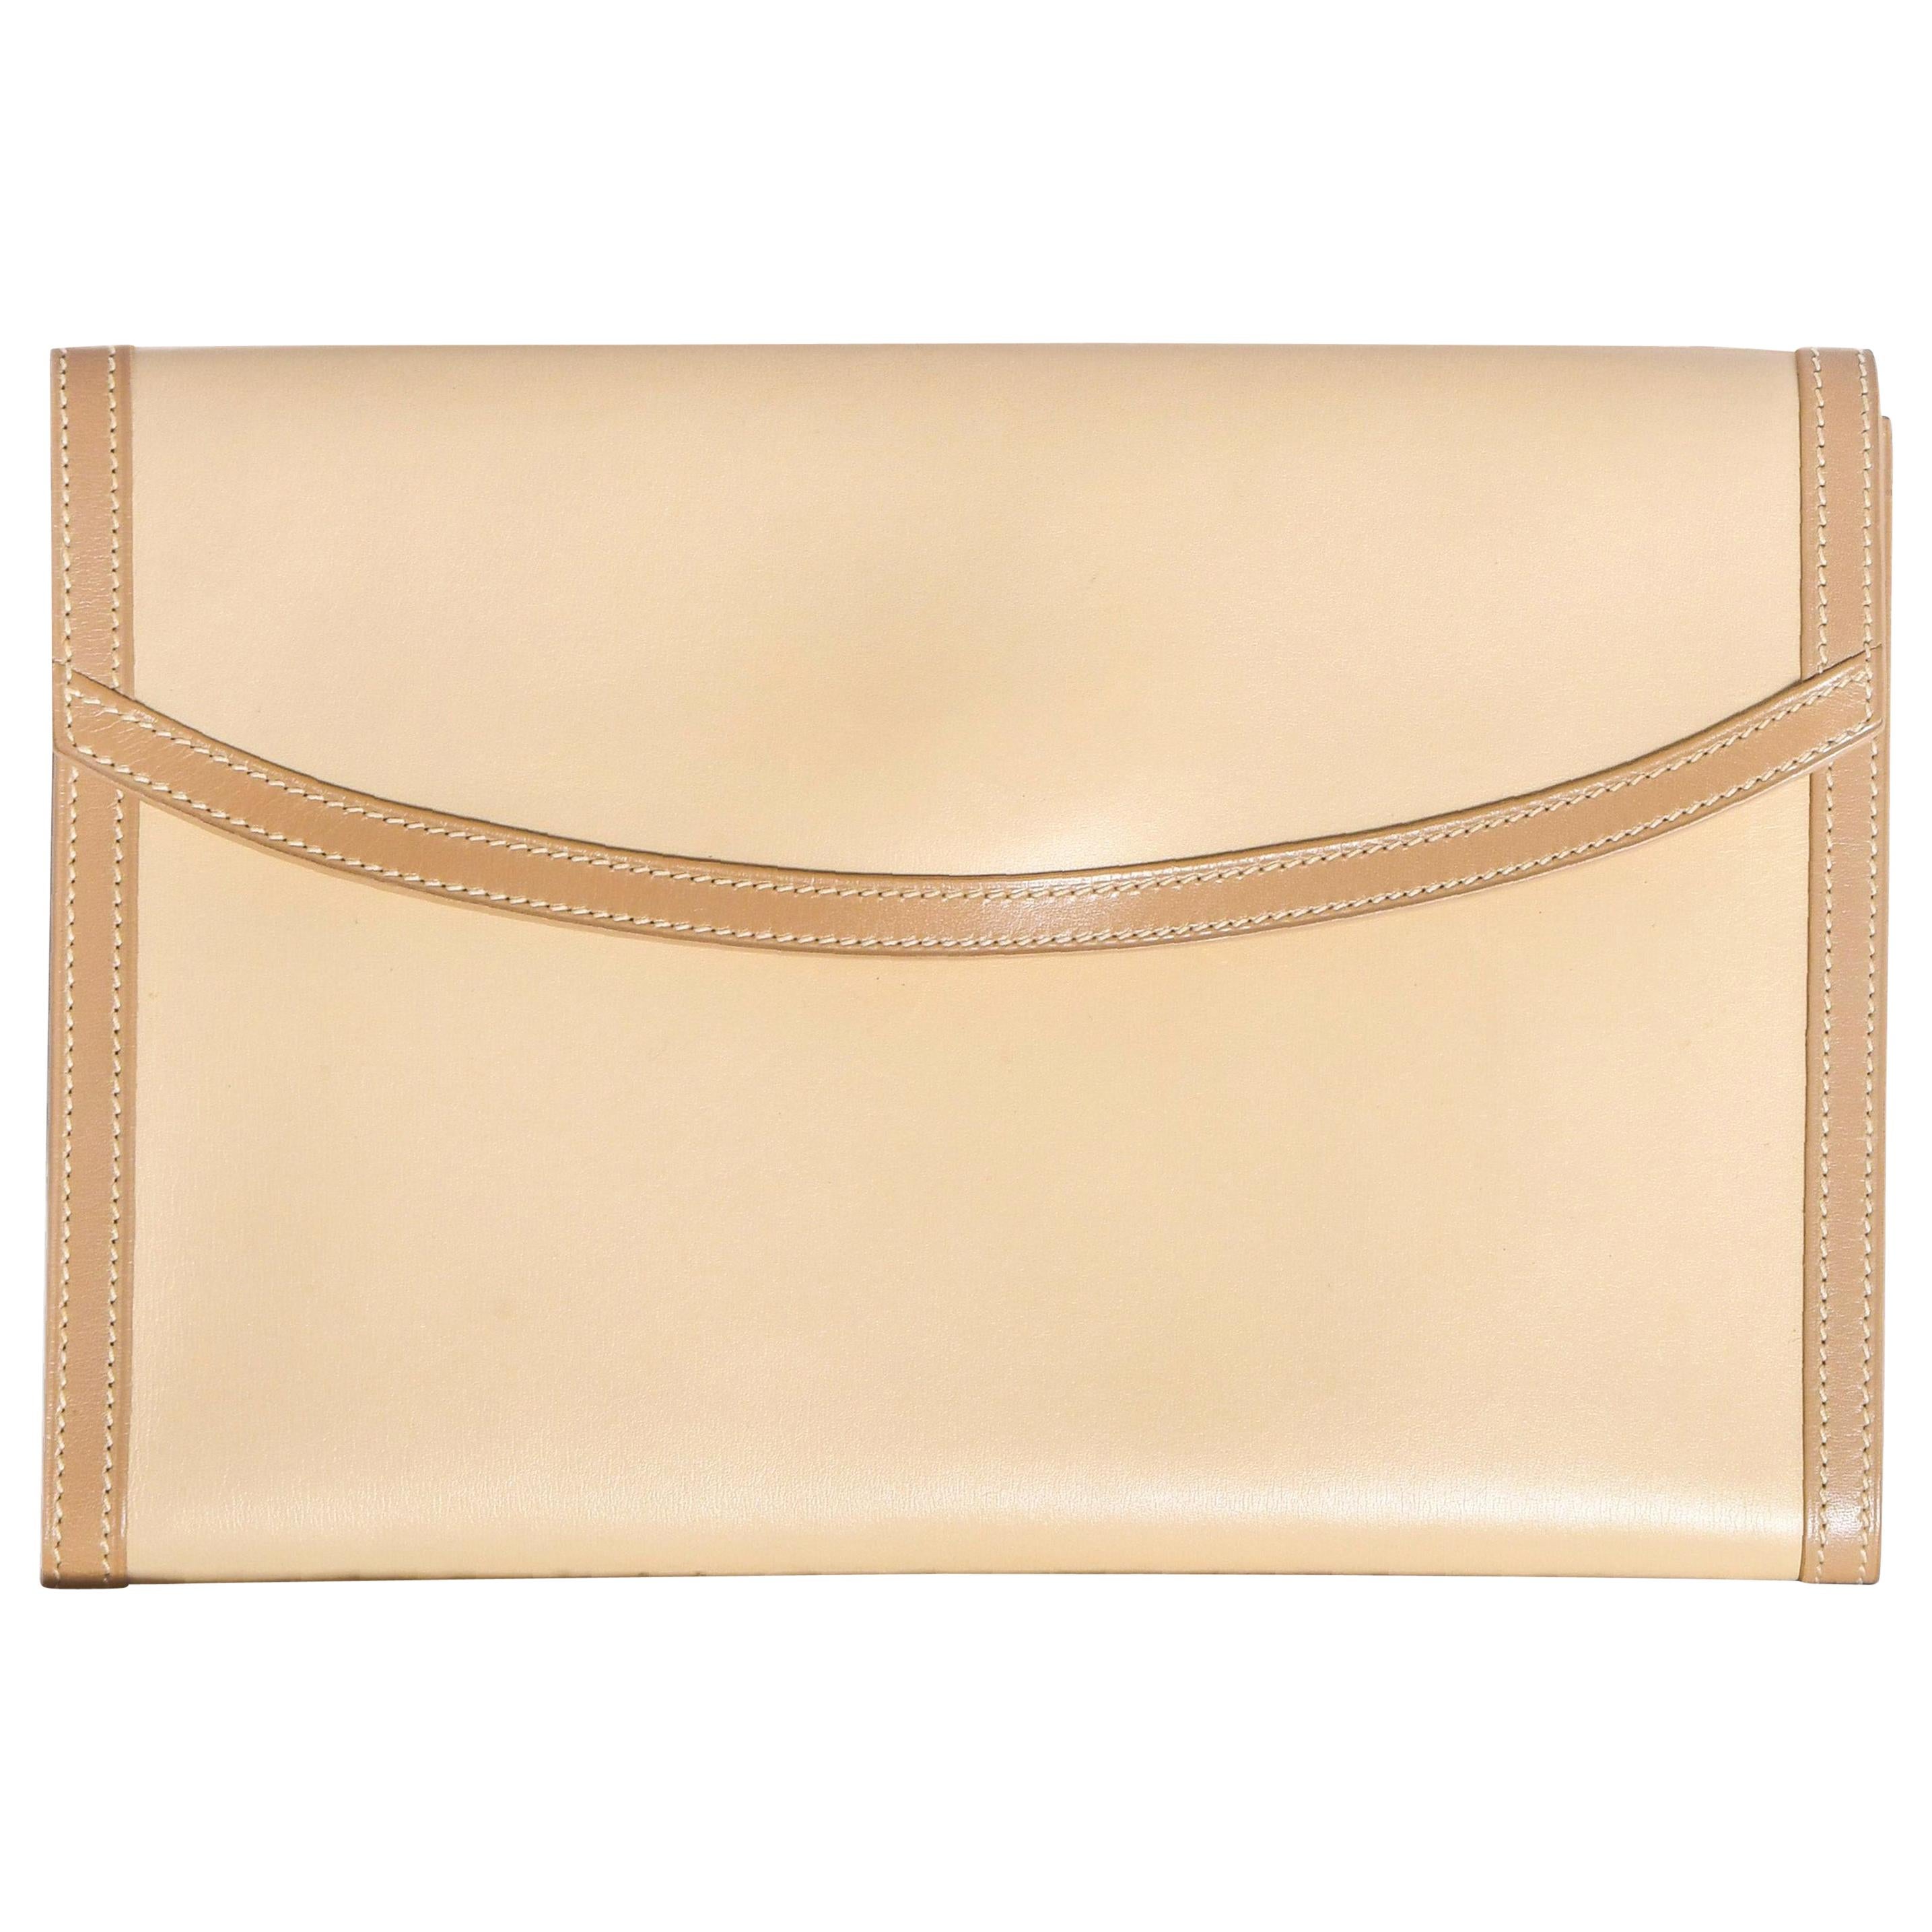 Hermes Beige Leather Envelope Evening Flap Clutch Bag With Tan Trim For Sale